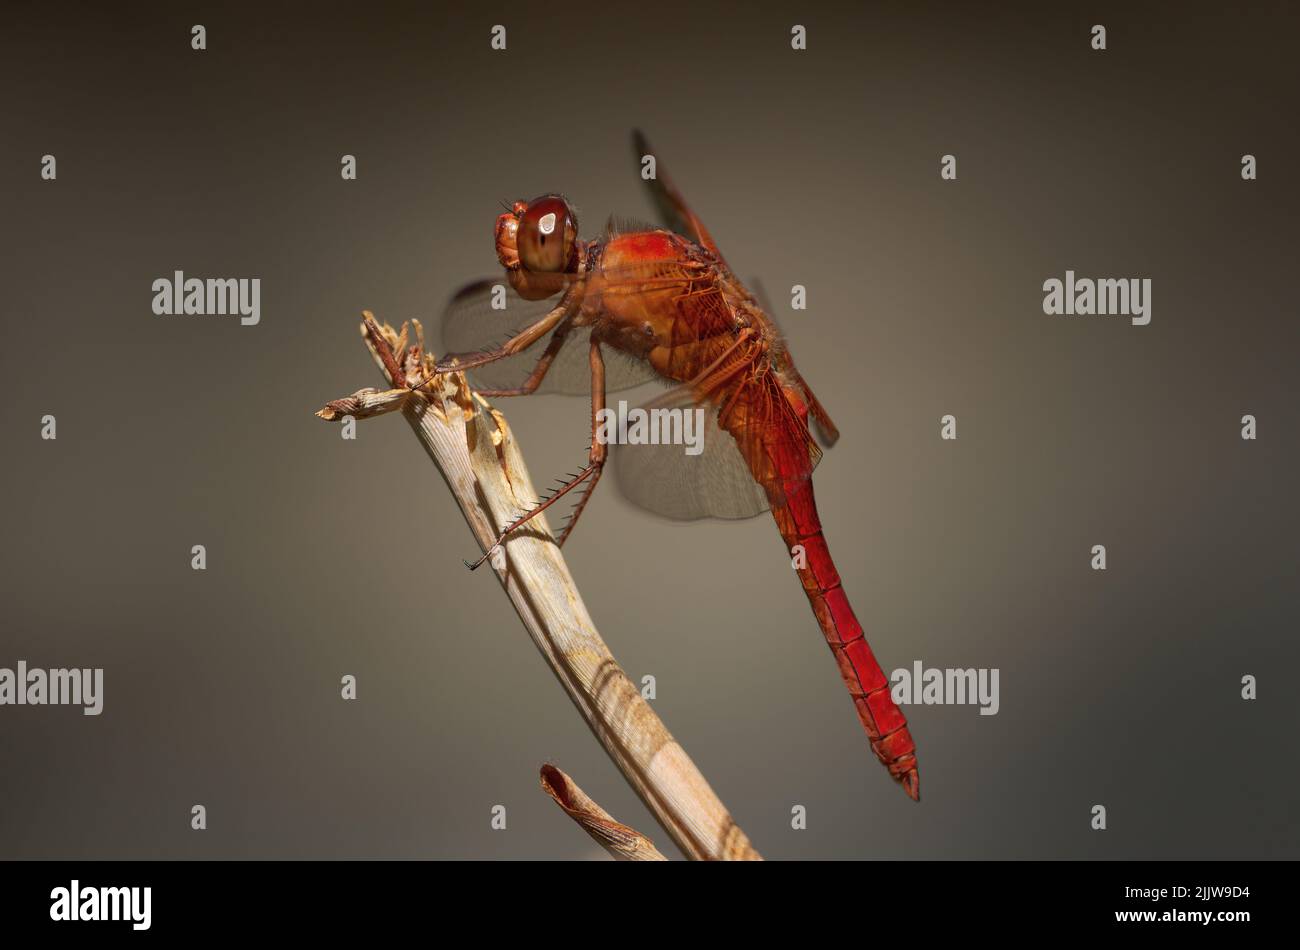 Flame Skimmer dragonfly, Libellula saturata, shown against against a muted background. Shown in Pasadena, California. Stock Photo